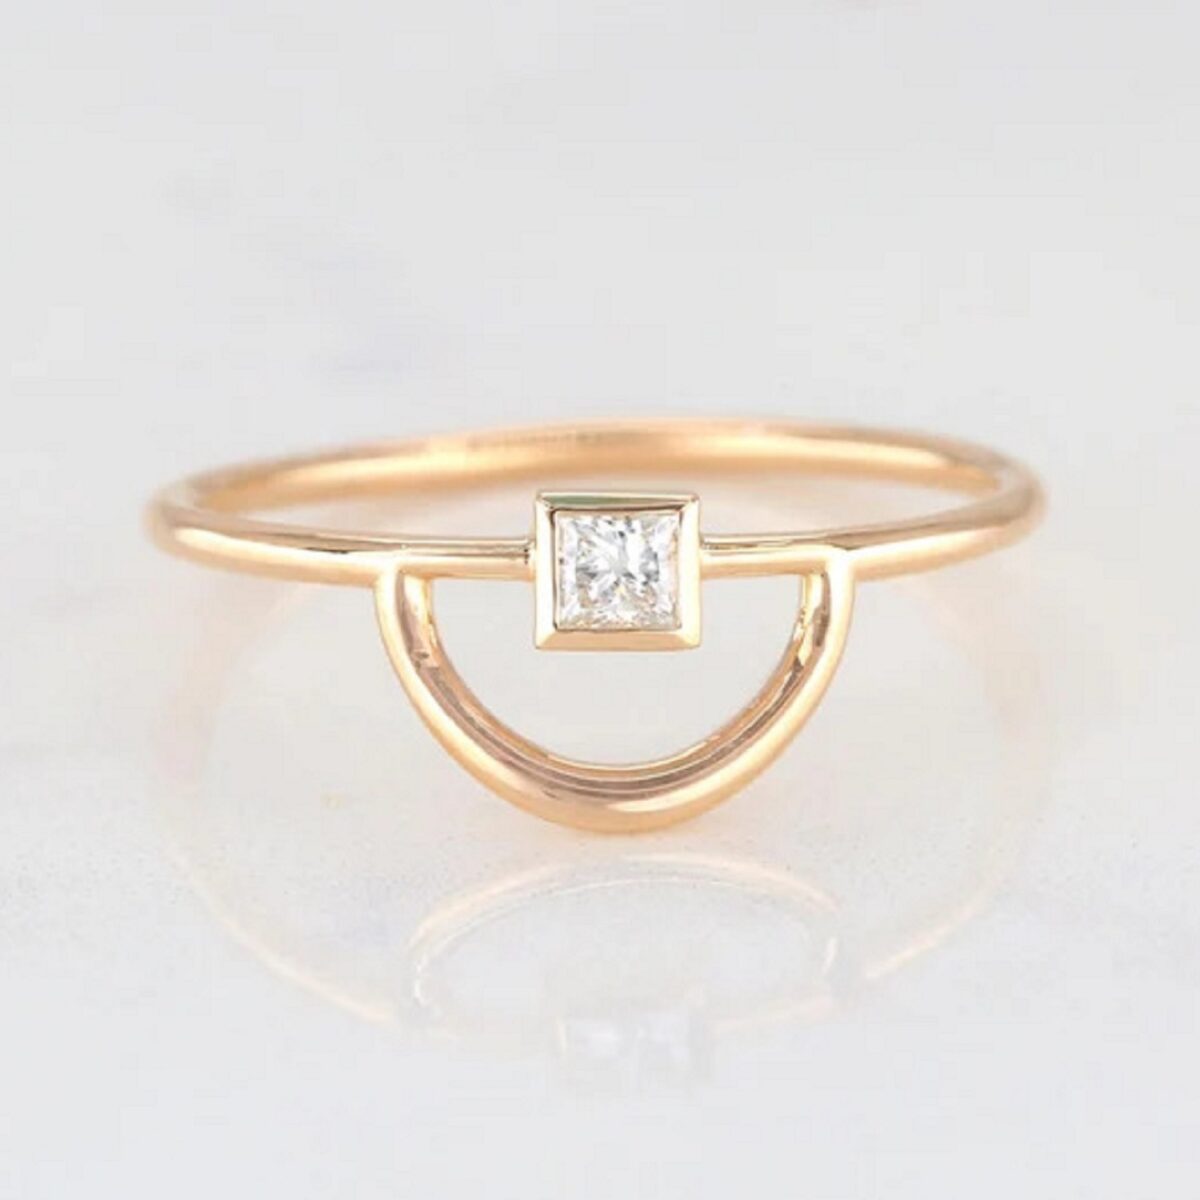 Bezel set 0.10 carat princess cut lab grown diamond solitaire ring crafted in 14k yellow gold